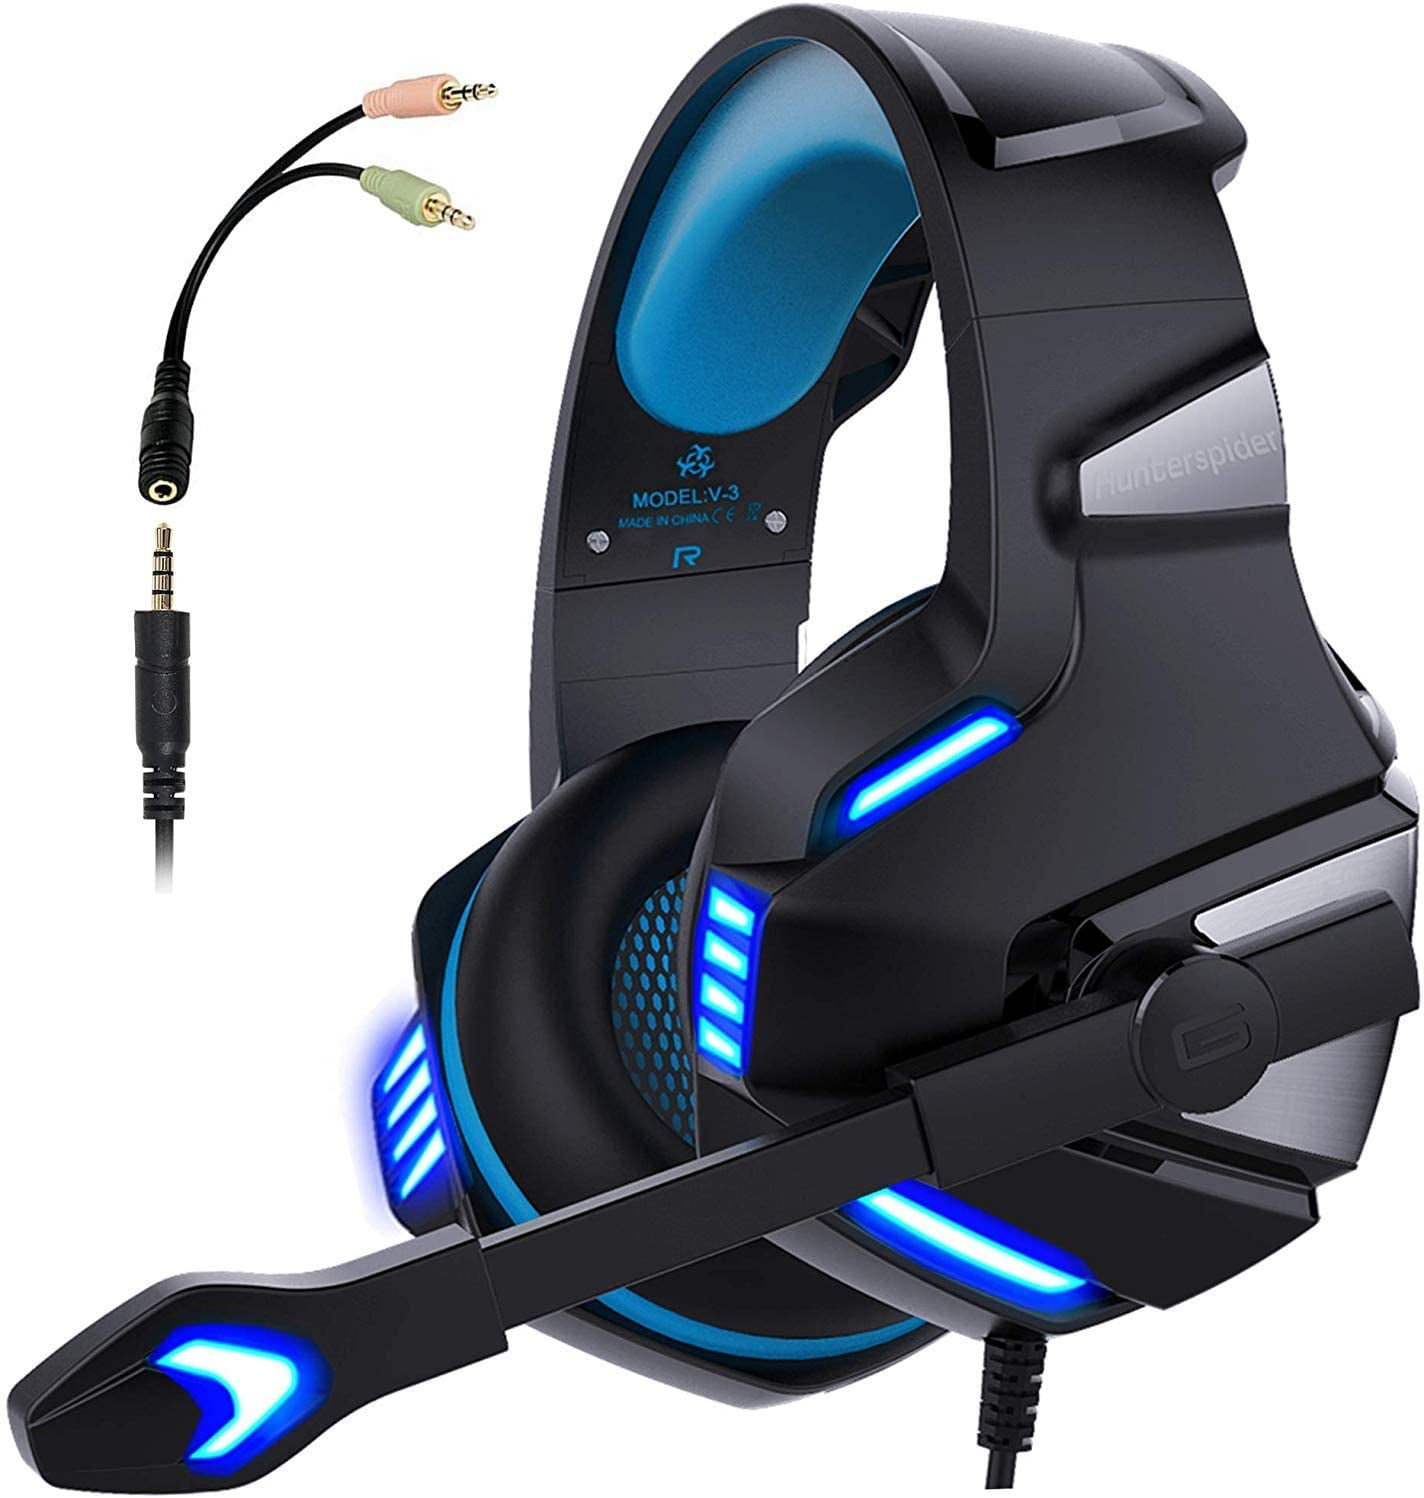 Wired Control Headphones/Headphones with LED Light Microphone Player for PC PS4 Xbox One,Blue GSUMMER Hunterspider V1 Headset